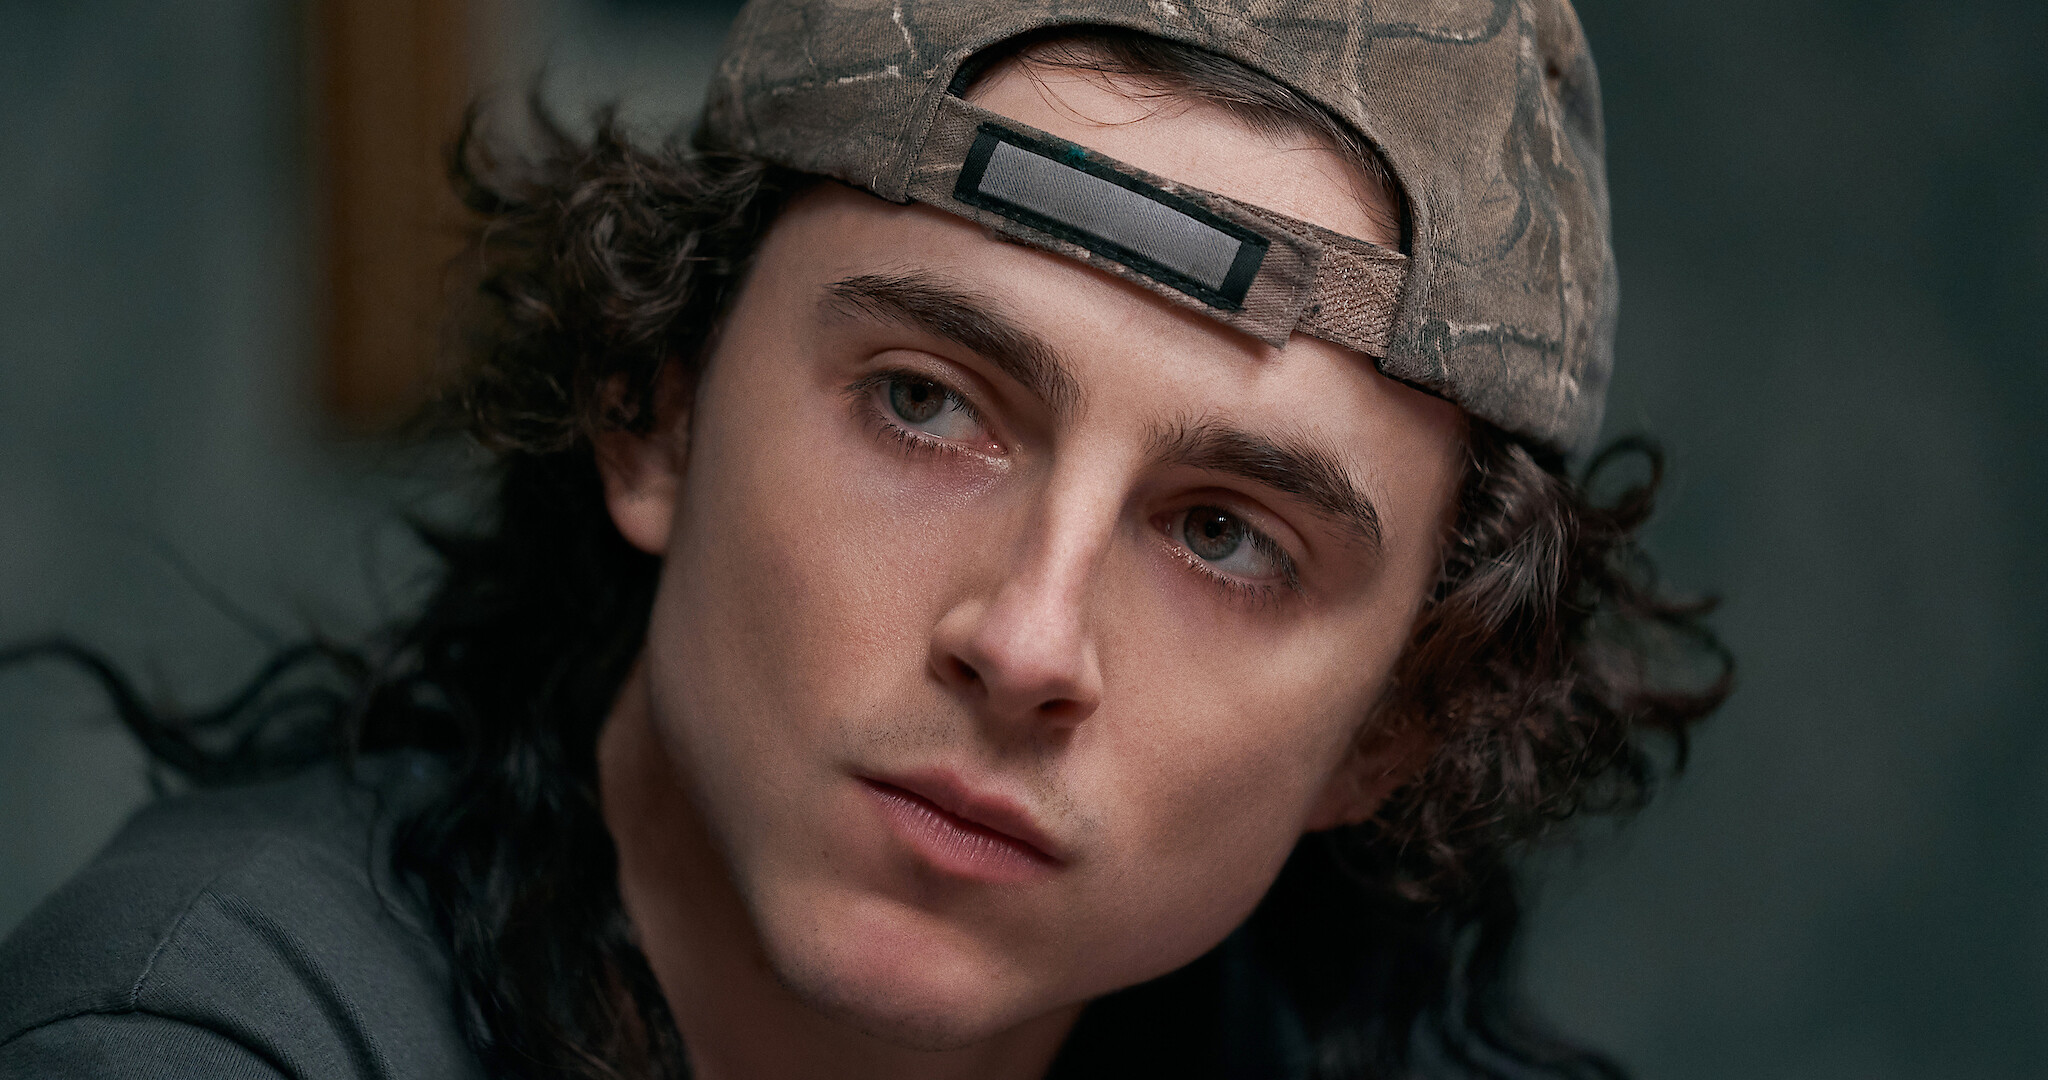 How to Watch Bones and All: Is the Timothee Chalamet Movie Streaming?